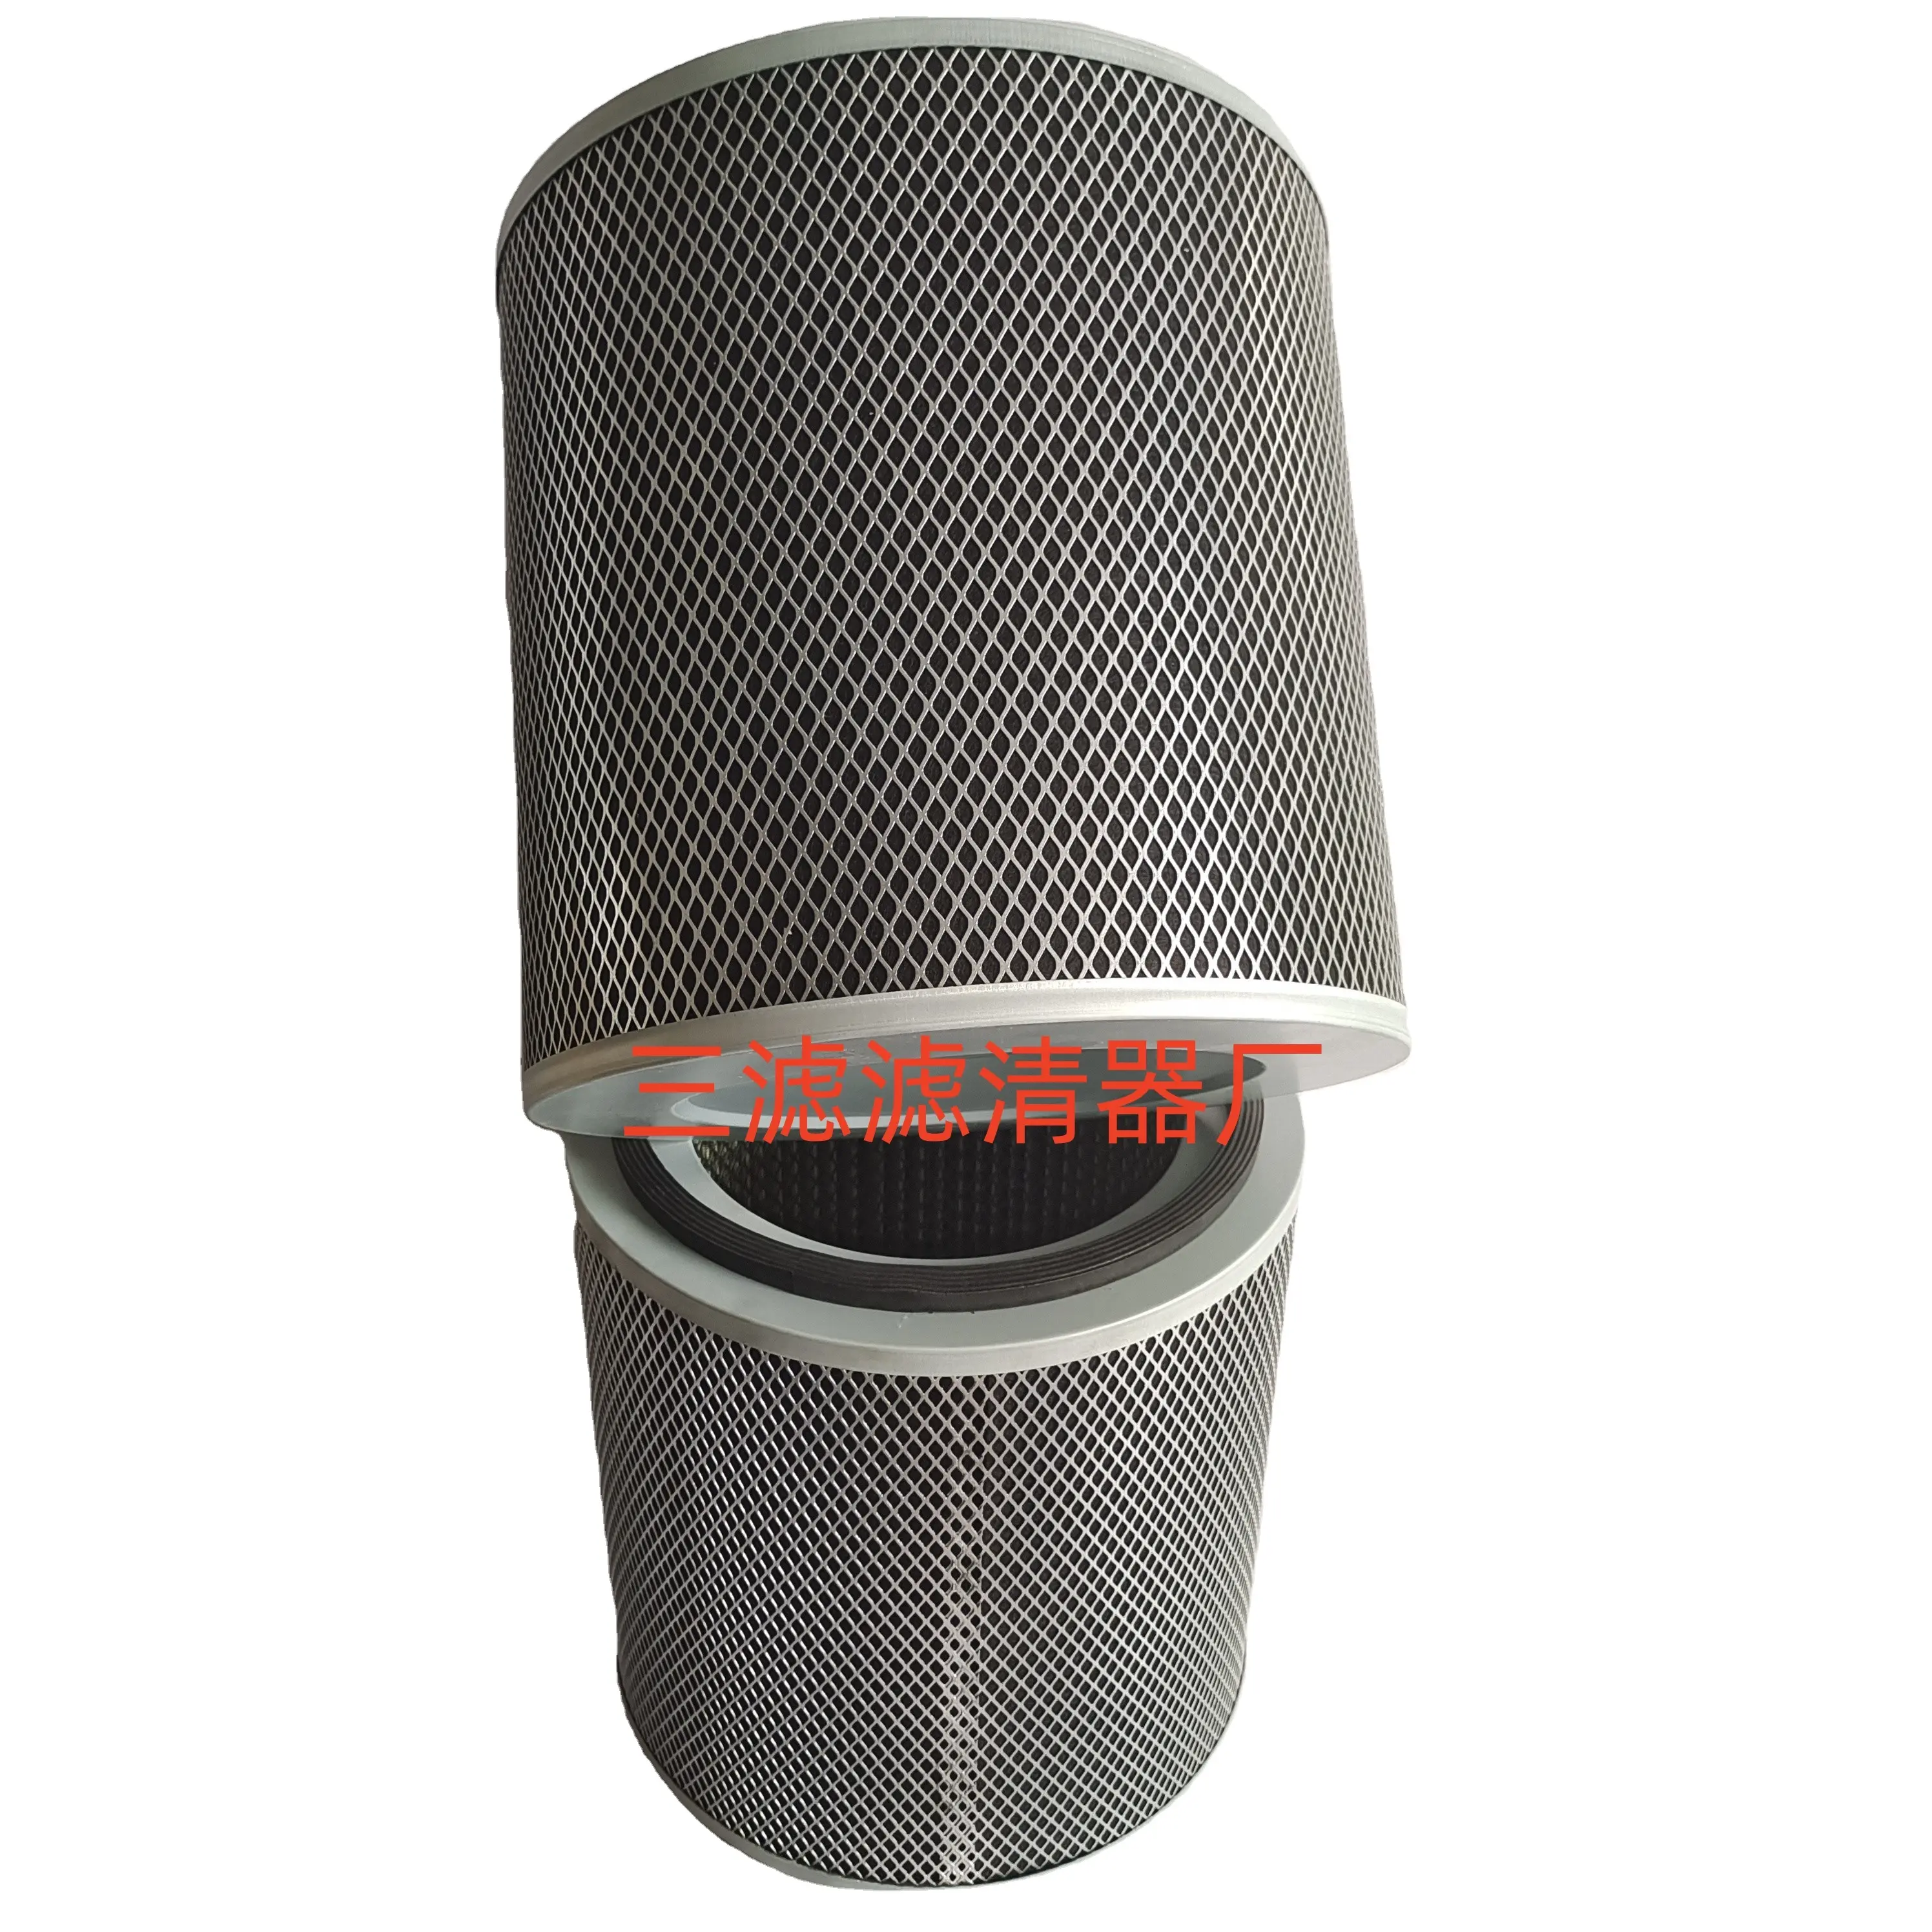 dependable performance remove odors and purify the air activated carbon oil mist filter element